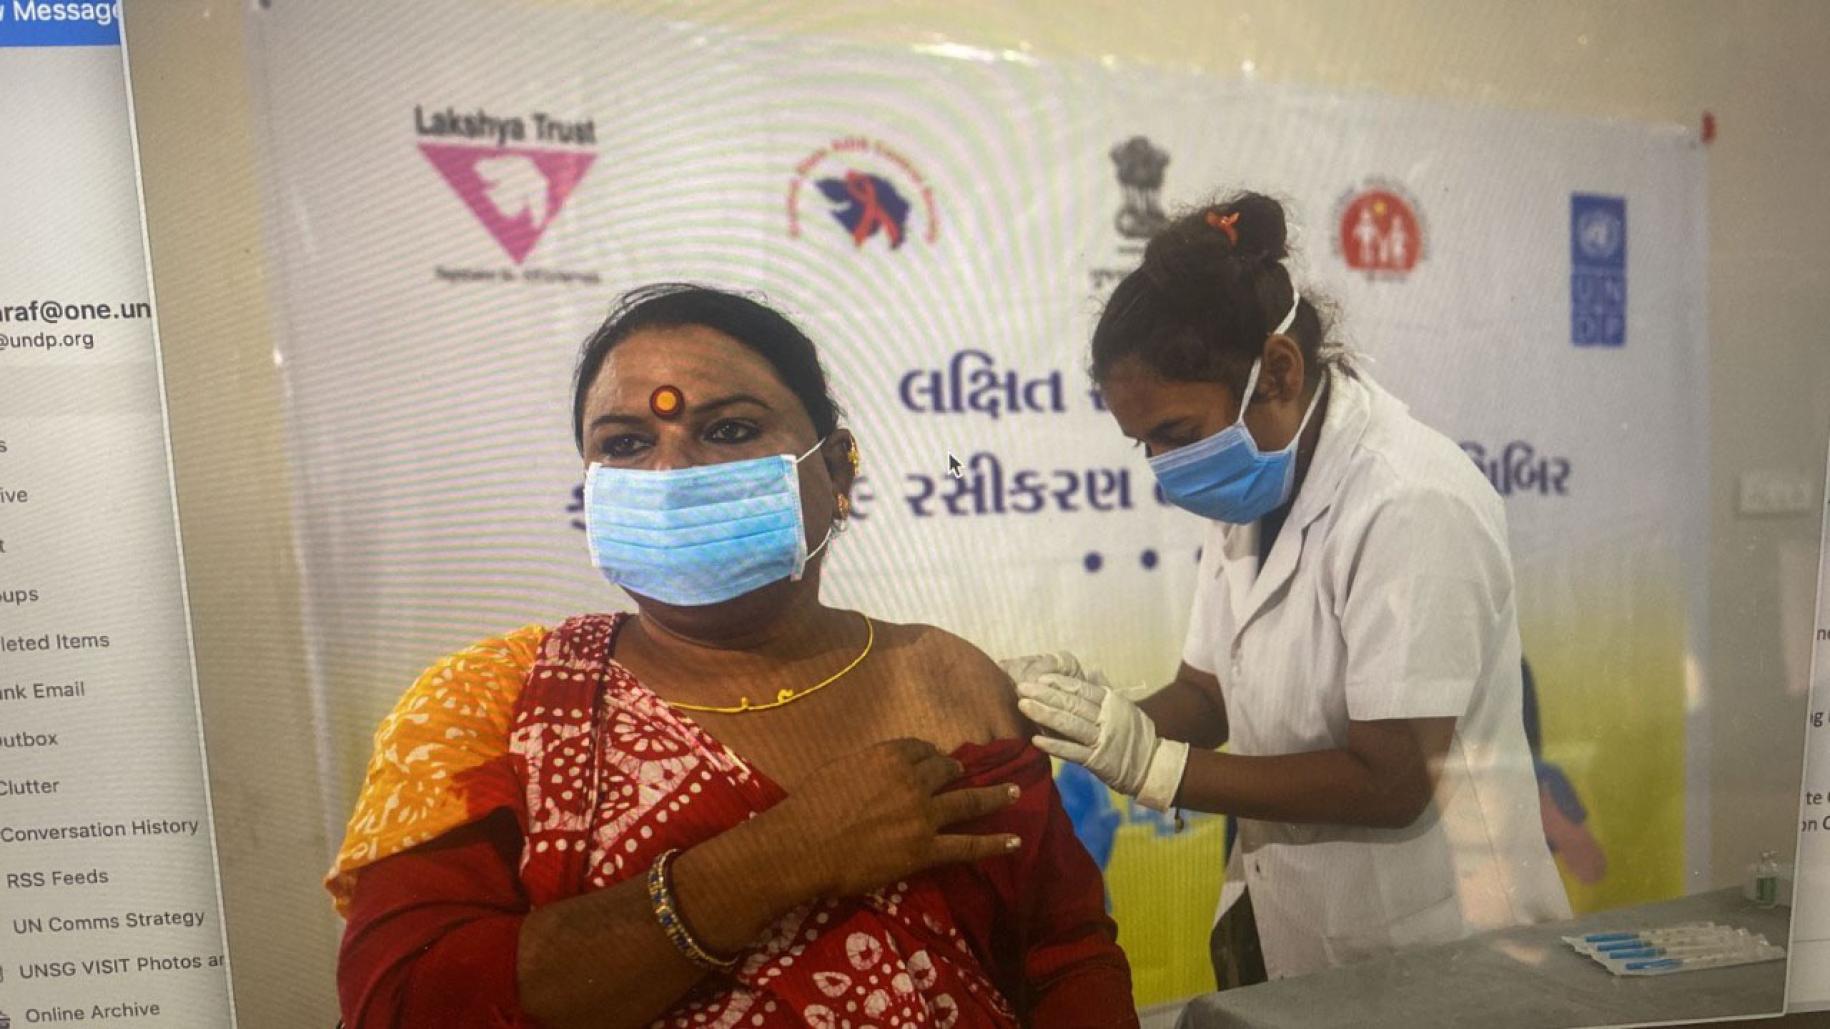 A woman in a light blue face mask receives a vaccine from a medical professional.